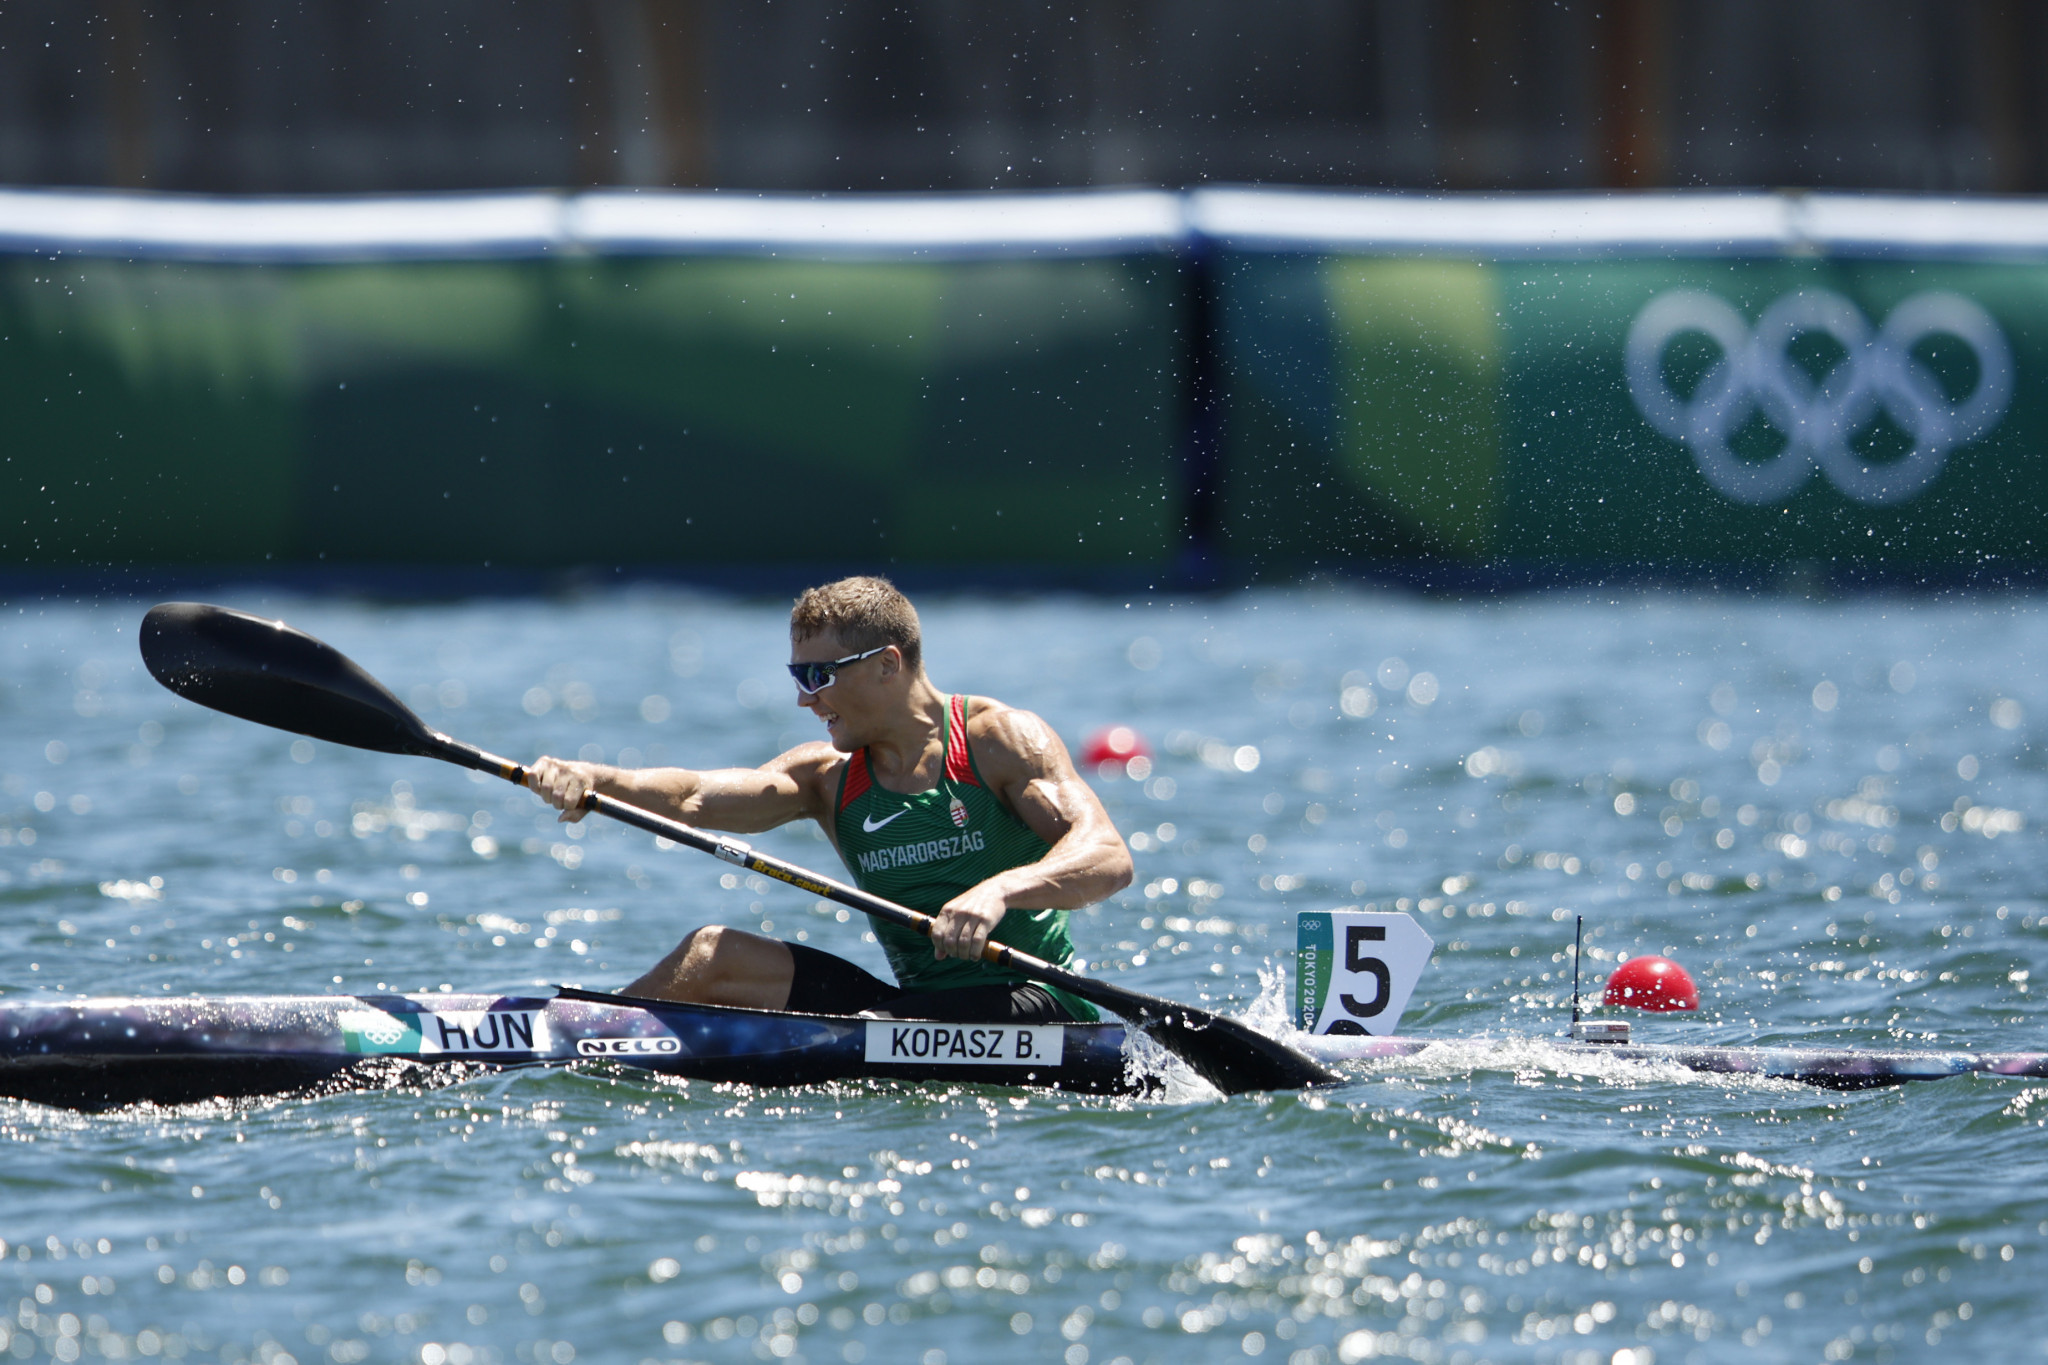 Four Tokyo 2020 Olympic gold medallists prepare for Canoe Sprint World Championships